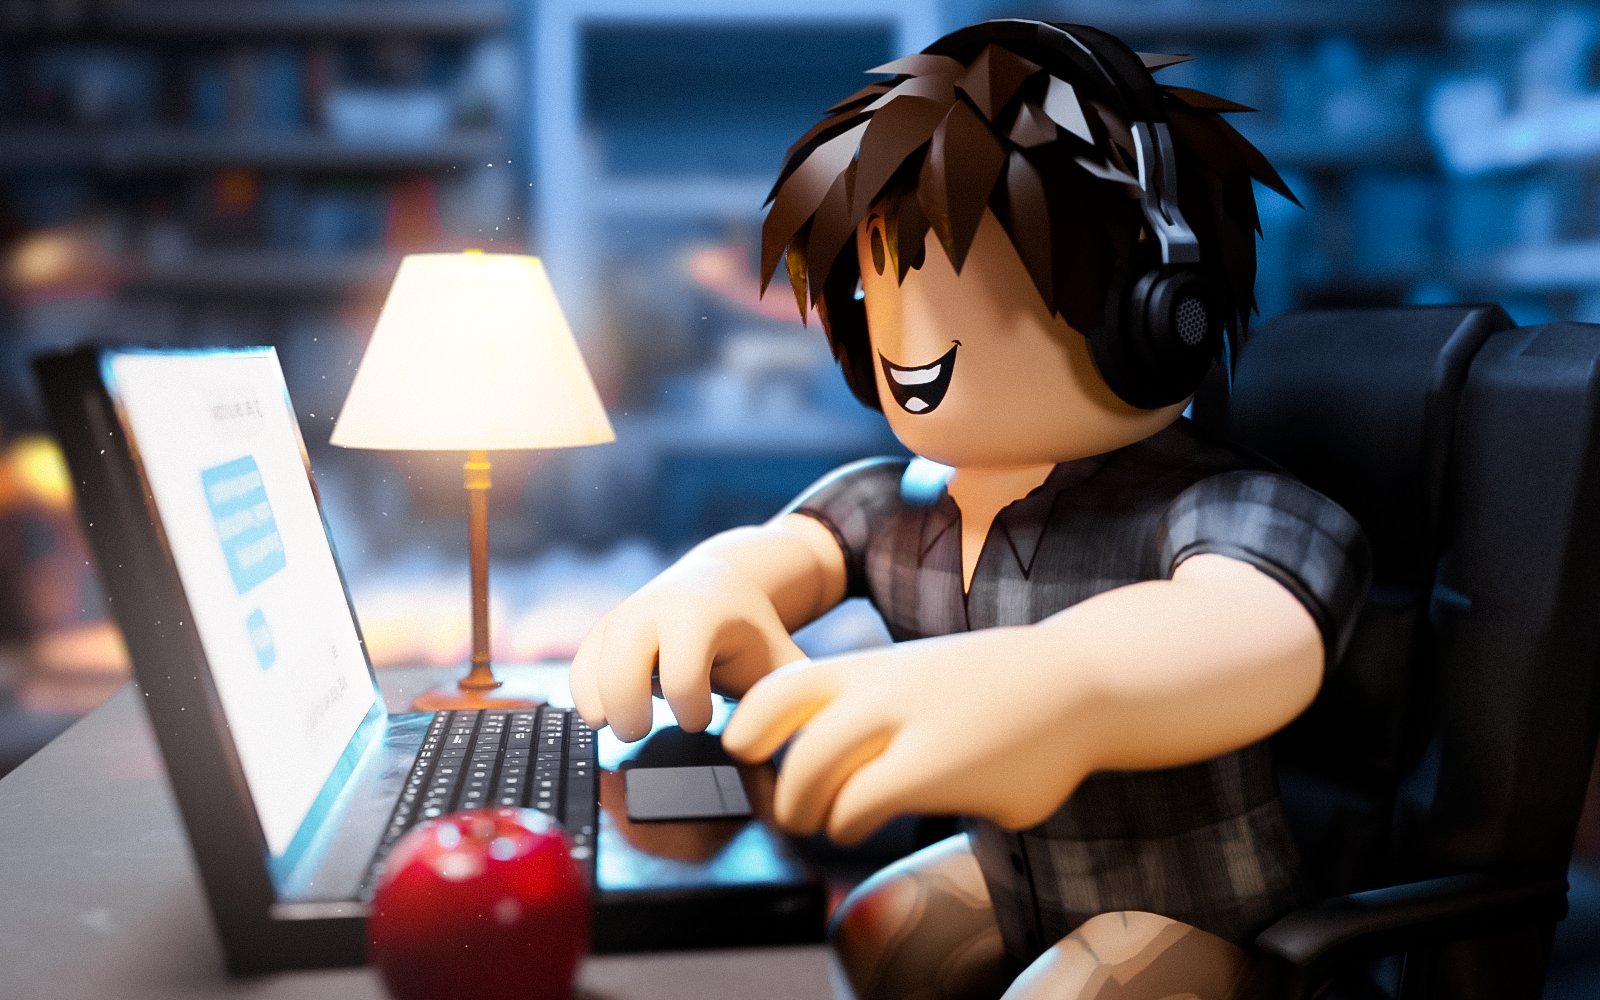 Roblox on X: We've heard your suggestions & improved the #Roblox